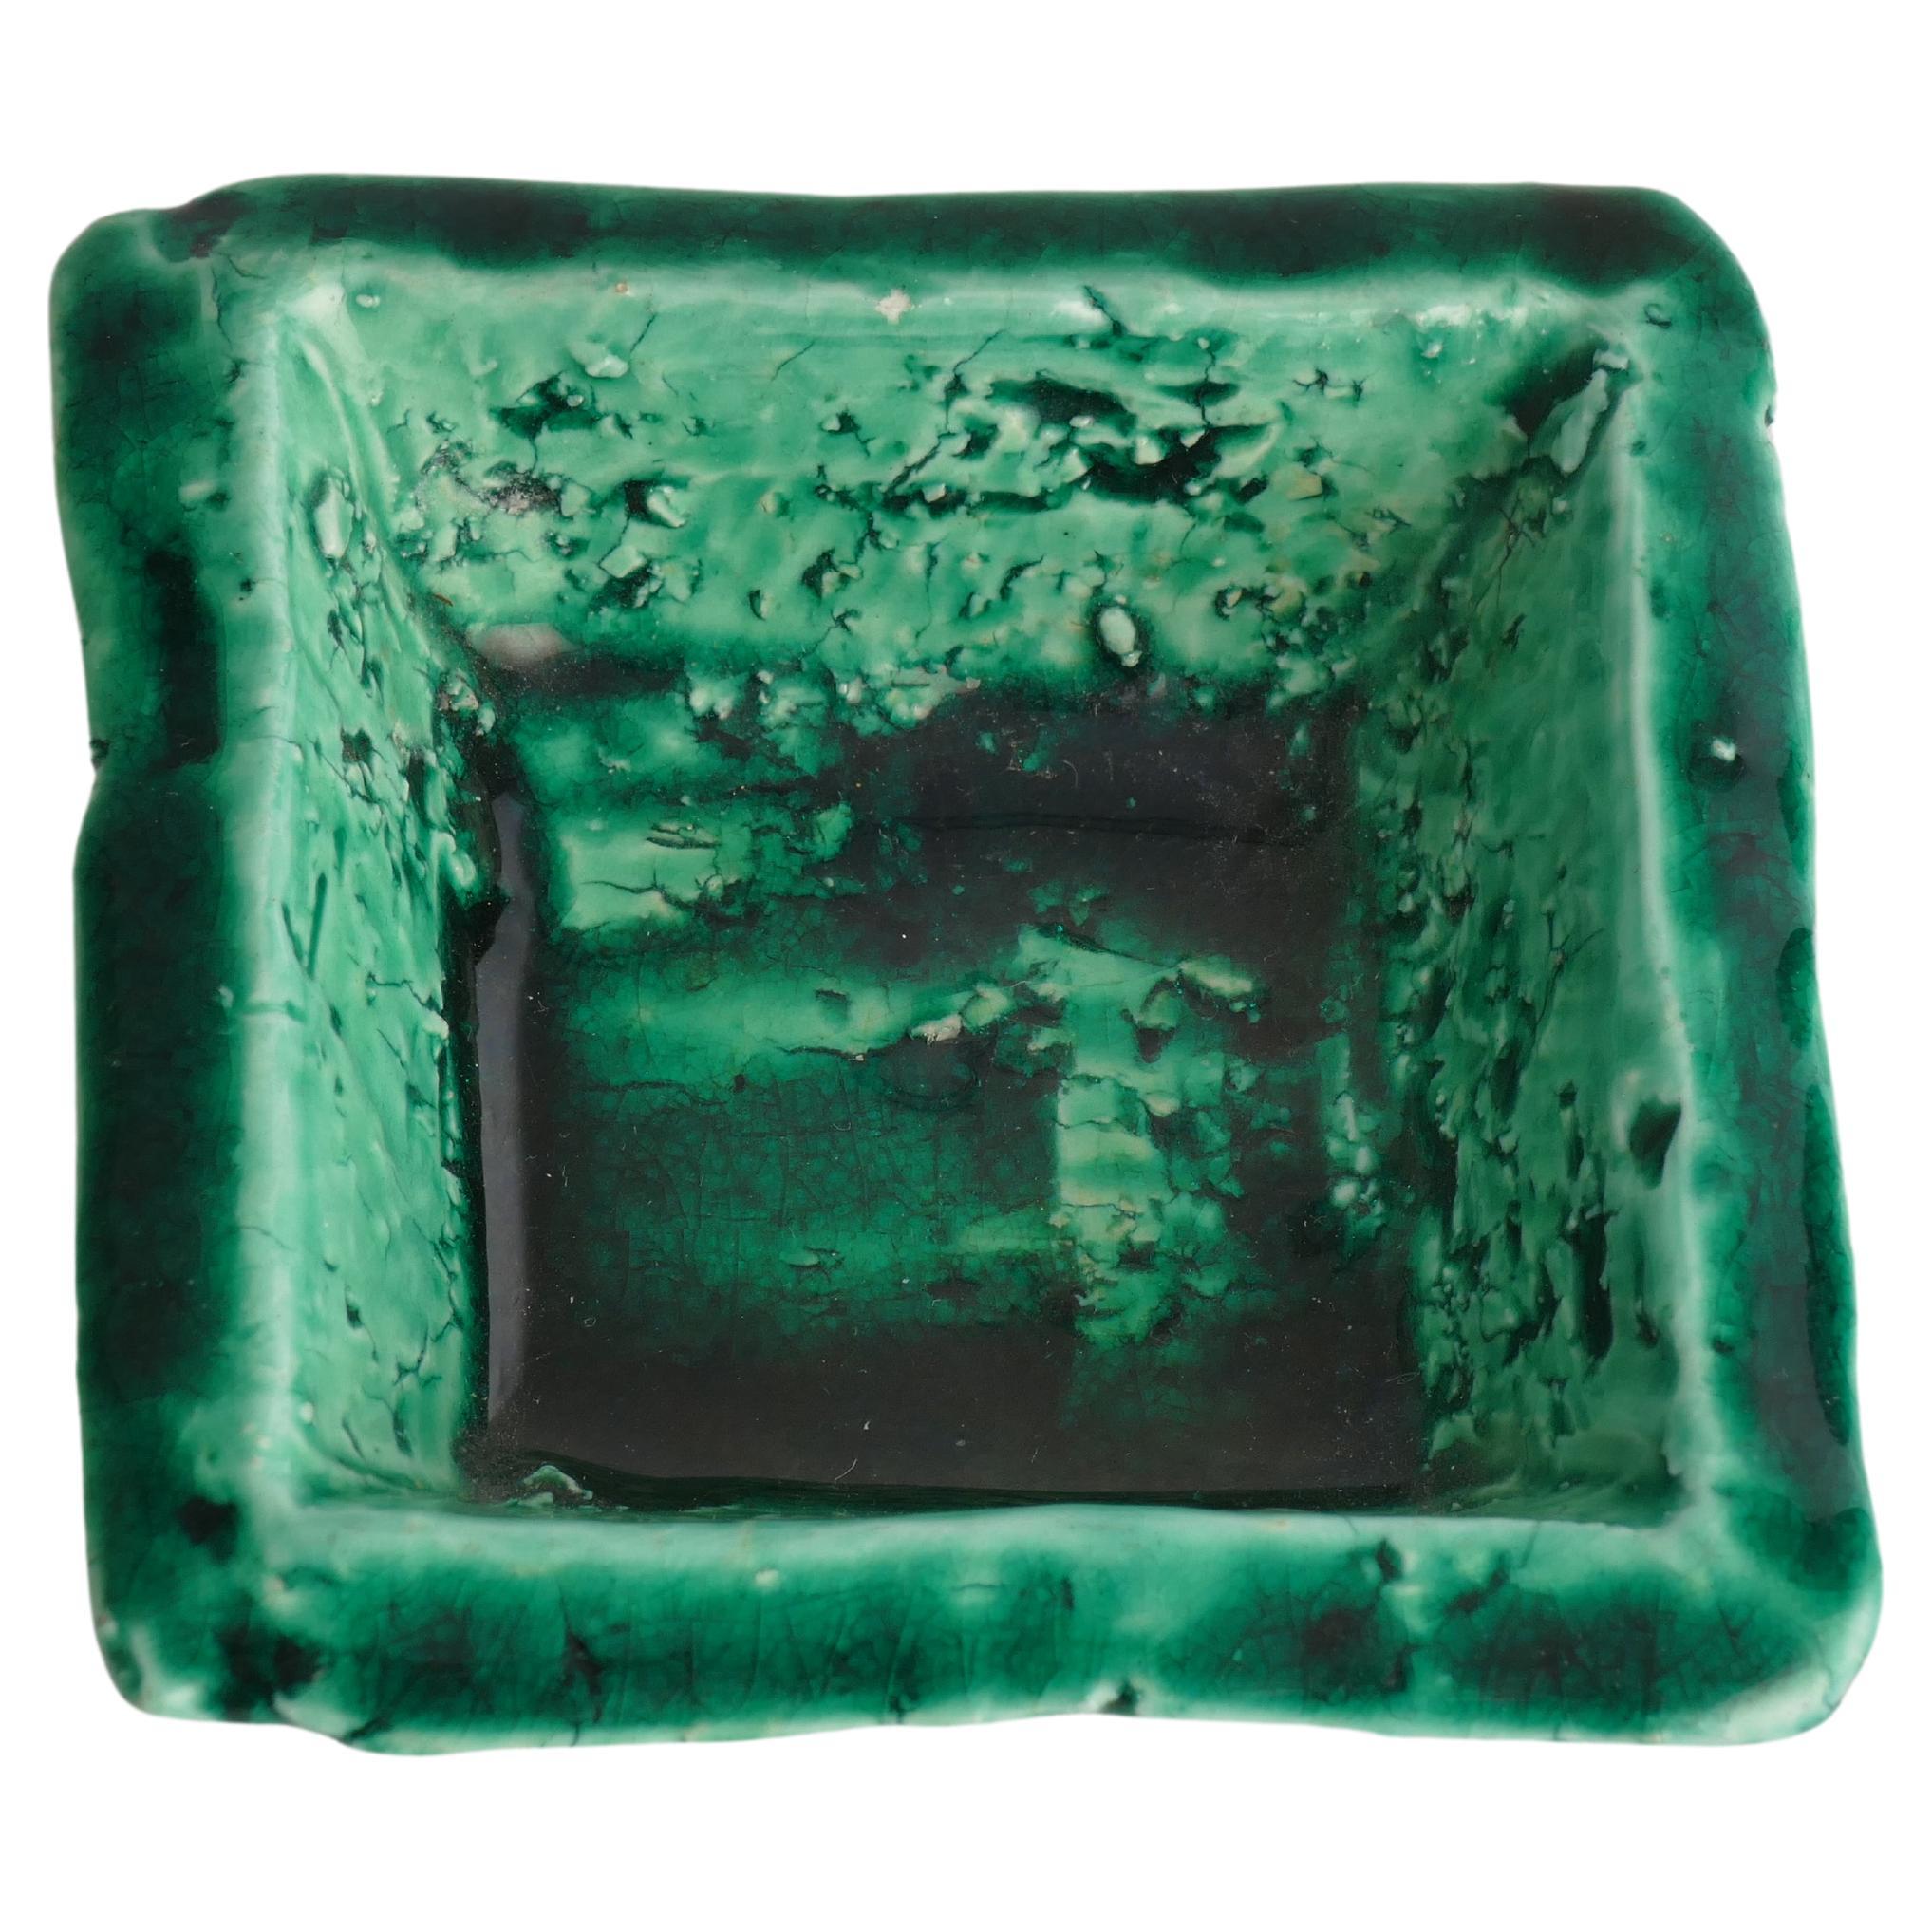 This petite emerald green chamotte bowl by renowned ceramic artist Gunnar Nylund for Rörstrand, may be small in size, but it exudes an undeniable charm that effortlessly elevates any space.

Immerse yourself in the allure of emerald or malachite